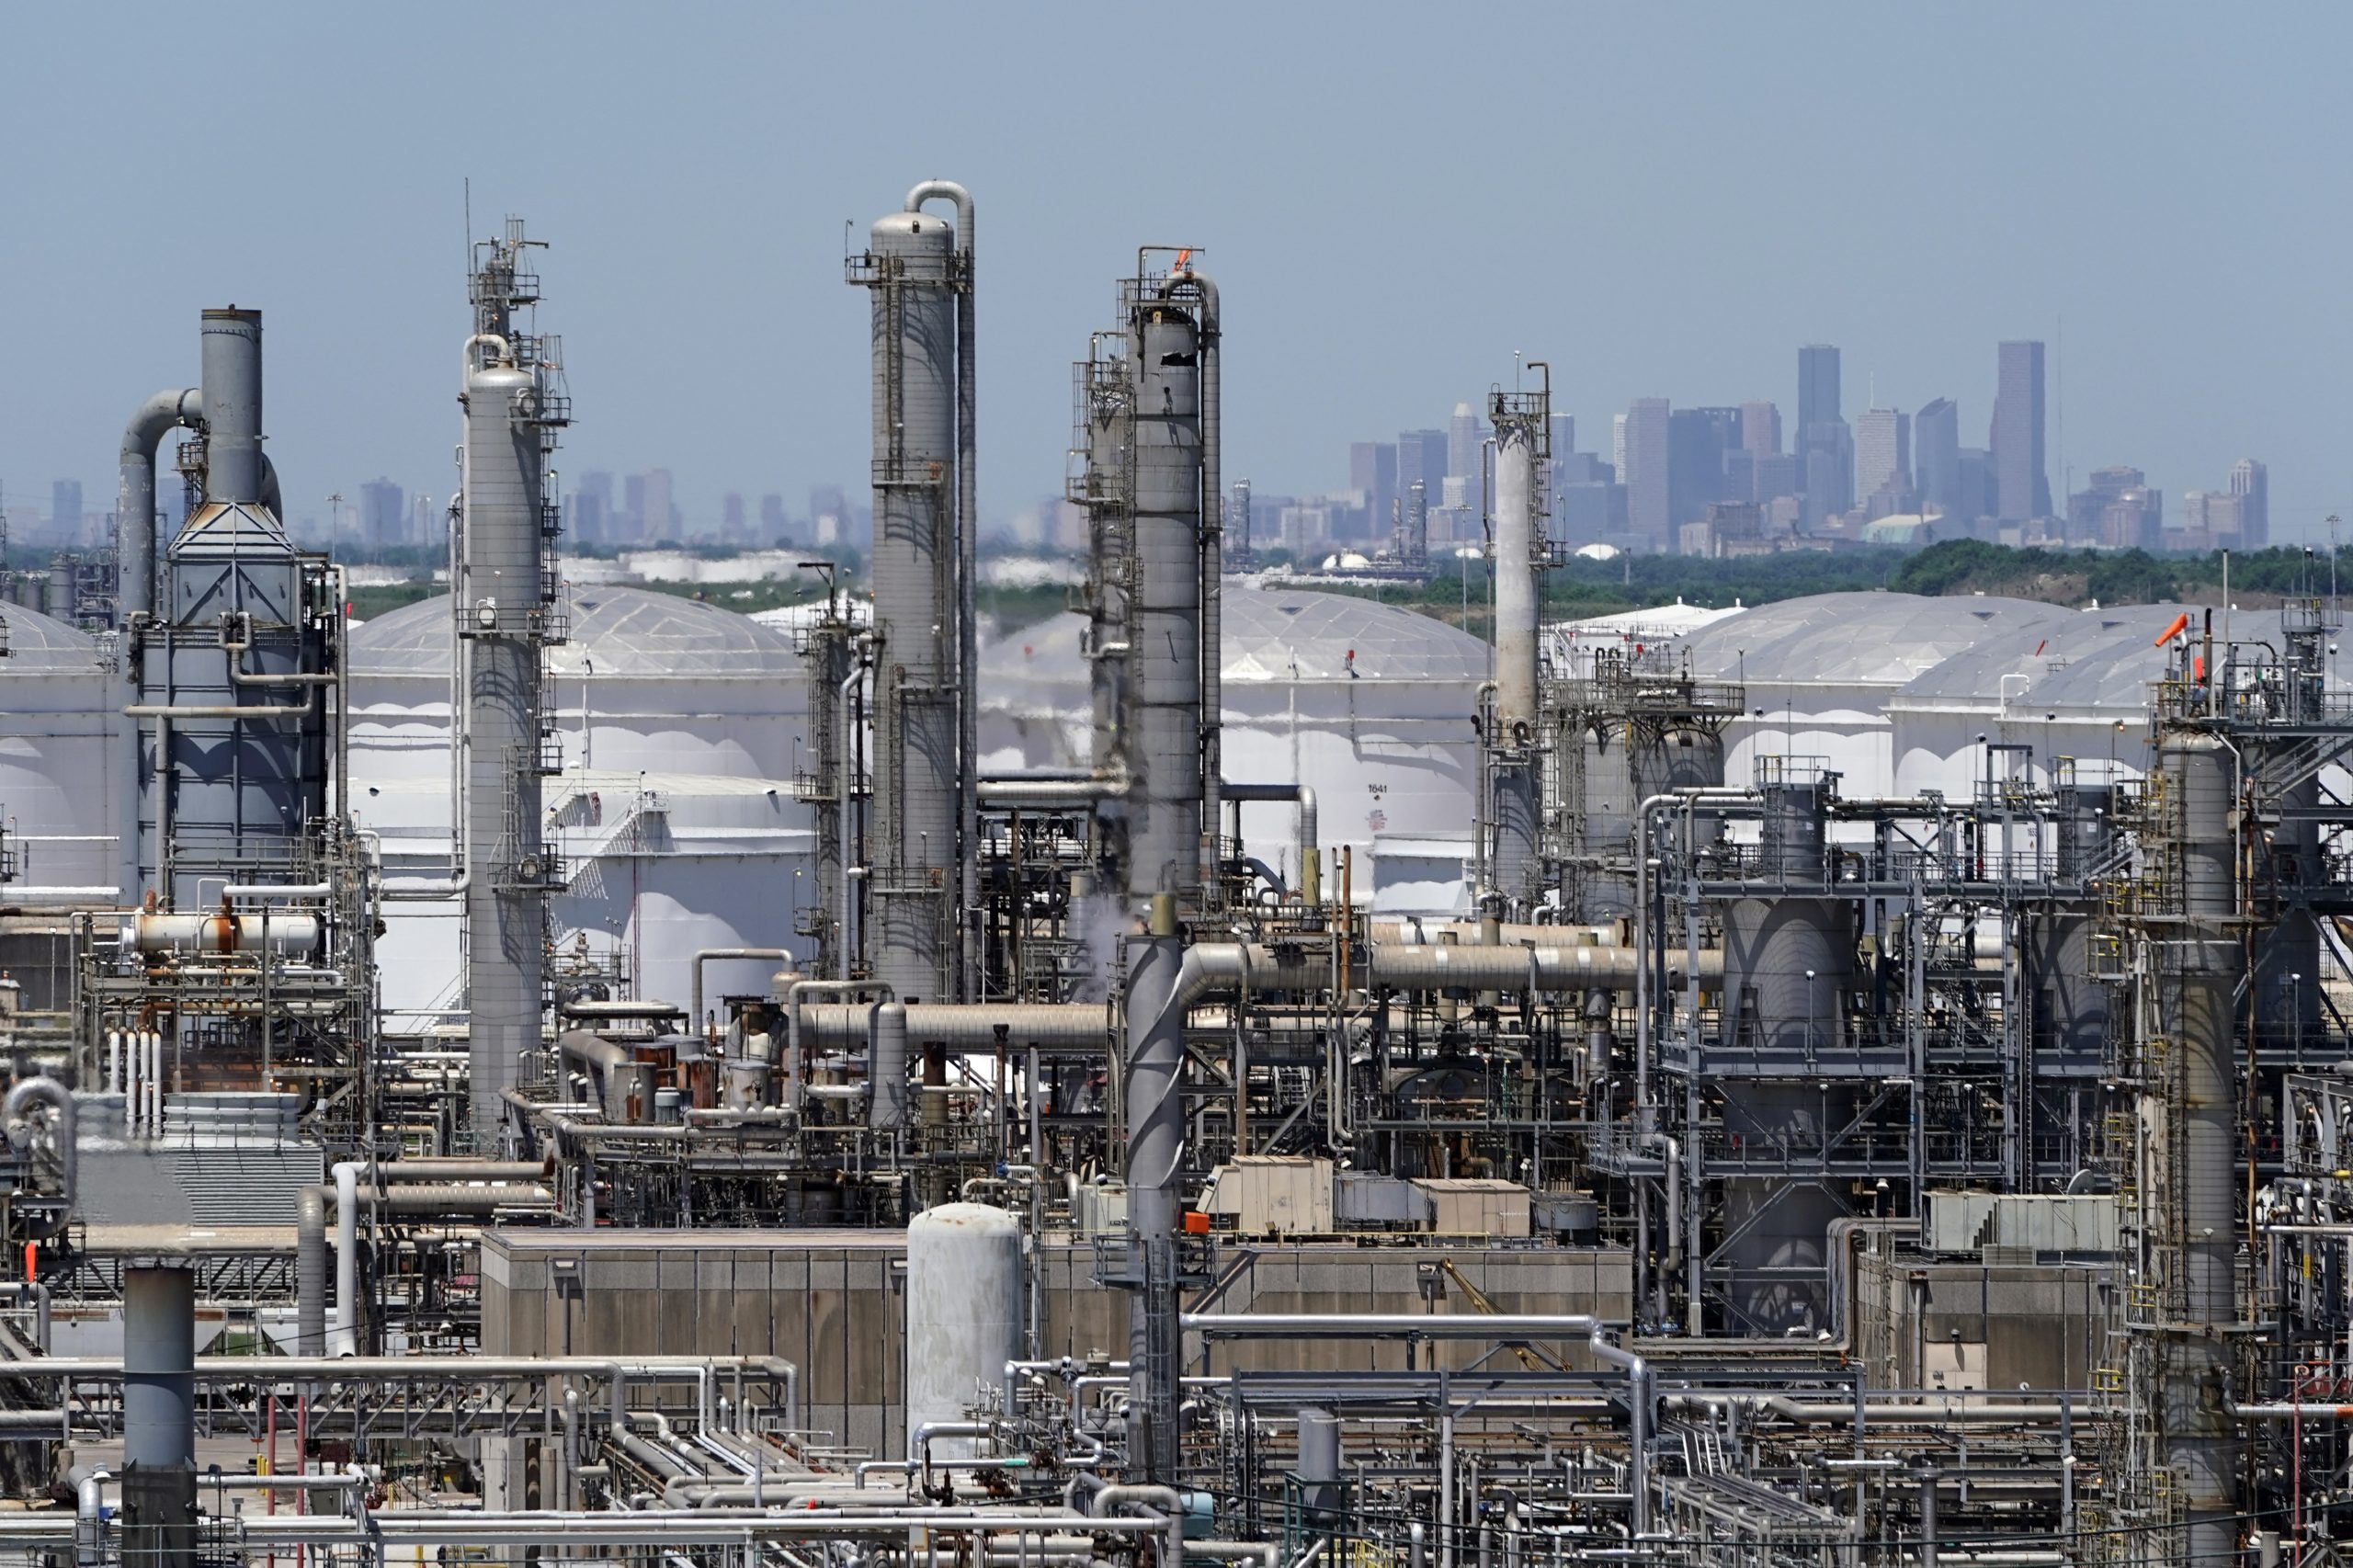 In this Thursday, April 30, 2020, photo a refinery along the Houston Ship Channel is seen with downtown Houston in the background. Like in other cities, the coronavirus has shut down much of Houston's economic activity, slashing thousands of jobs, while at the same time, the price of oil plunged below zero recently as demand plummeted due to the worldwide lockdown to stop the spread of the virus. This one-two punch from COVID-19 and the collapse in oil prices will make it much harder for Houston to recover from a looming recession, according to economists.